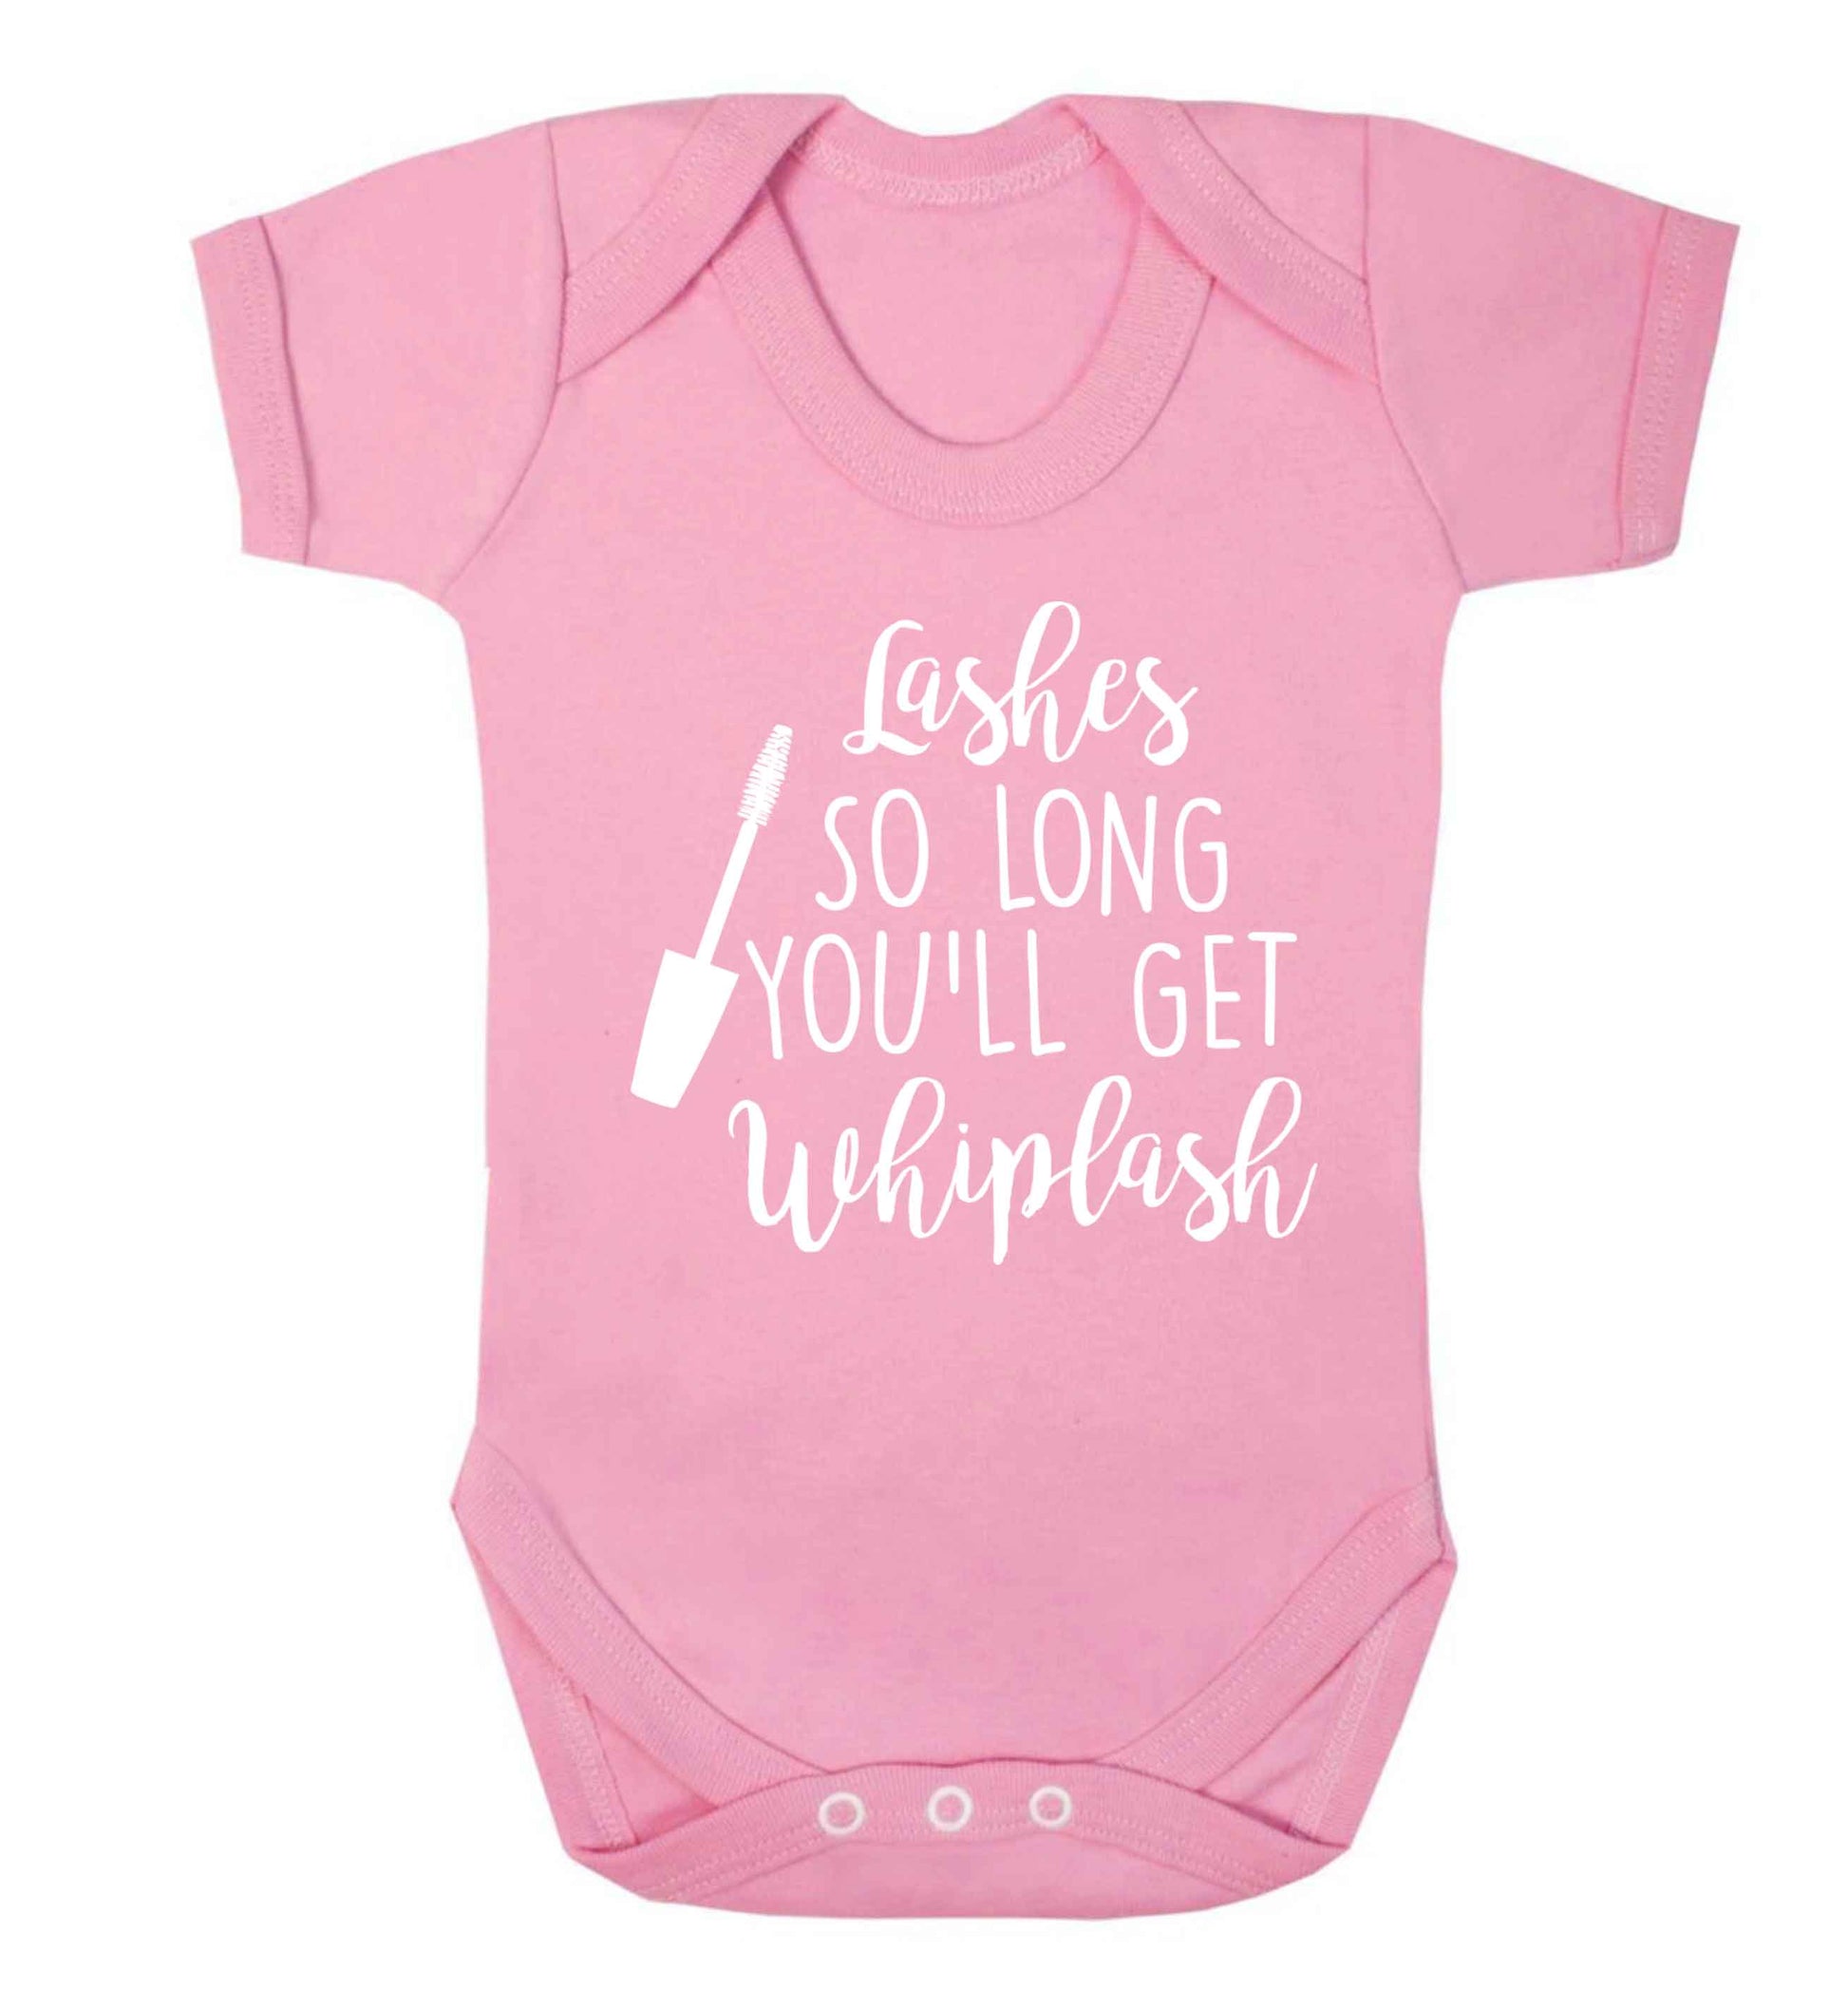 Lashes so long you'll get whiplash Baby Vest pale pink 18-24 months